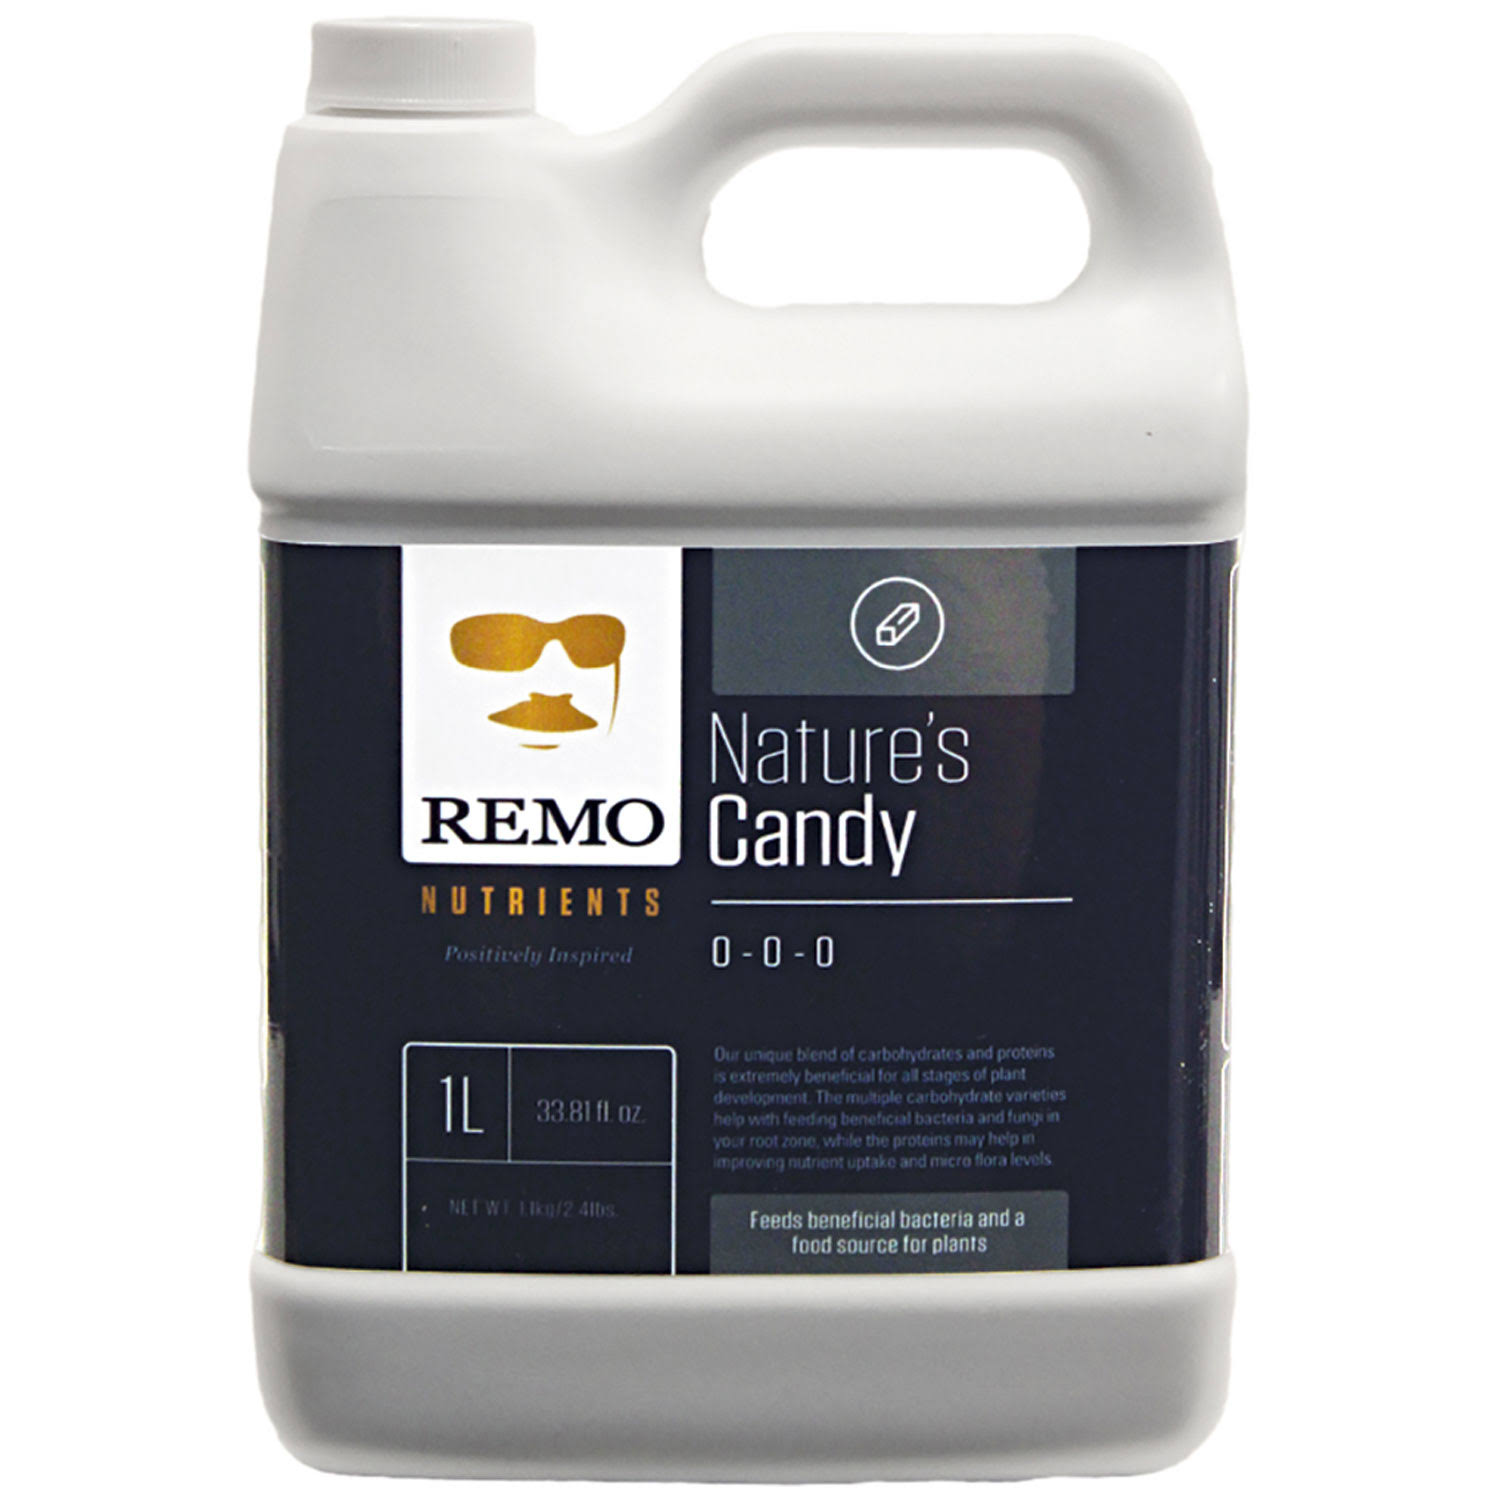 Remo Nutrient's Natures Candy - 1L